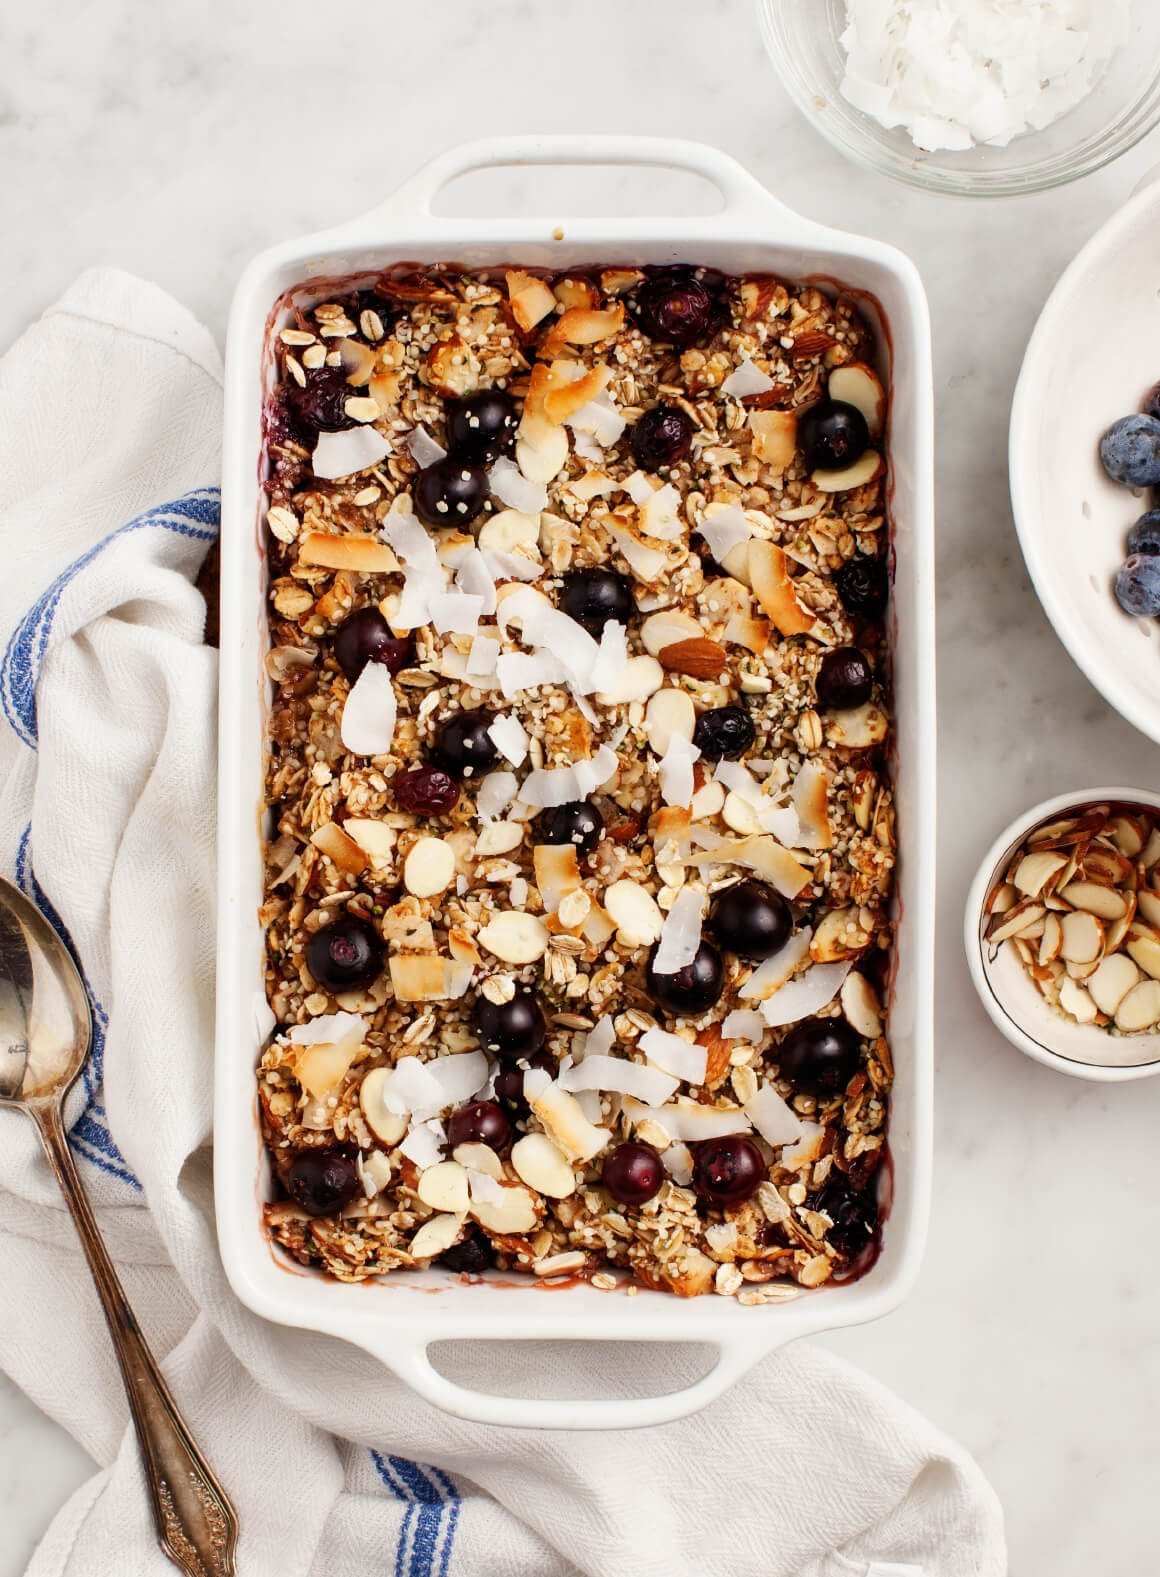 Baked Oatmeal with Blueberries, This healthy baked oatmeal recipe makes for a delicious brunch! I love this blueberry version, but for a twist, swap in whatever seasonal fruit you like.